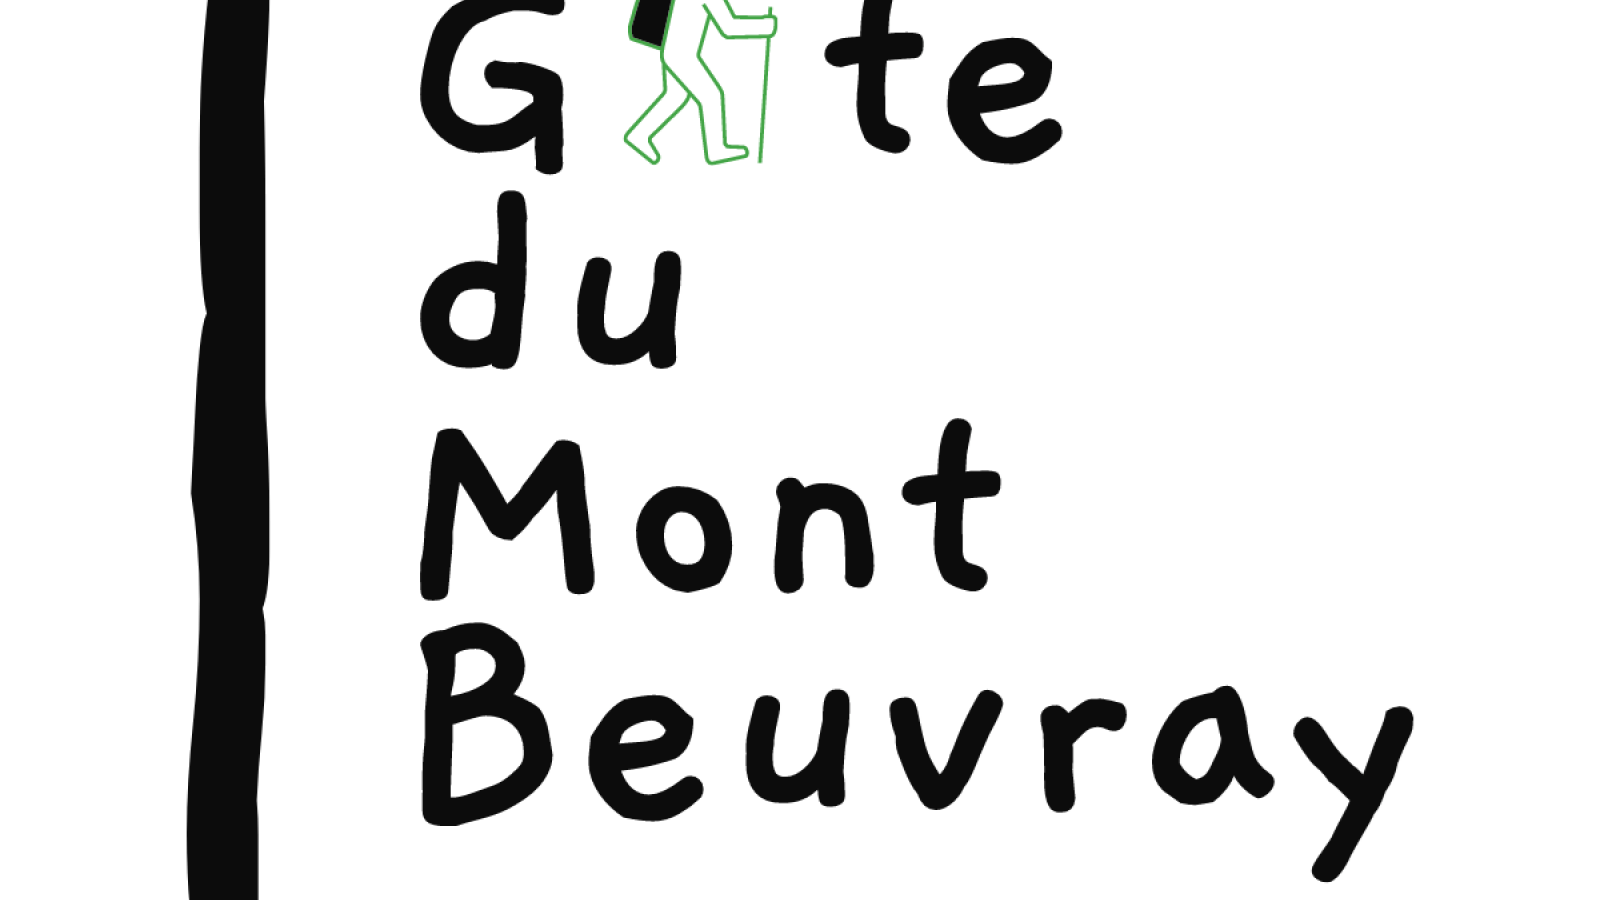 Le Mont Beuvray